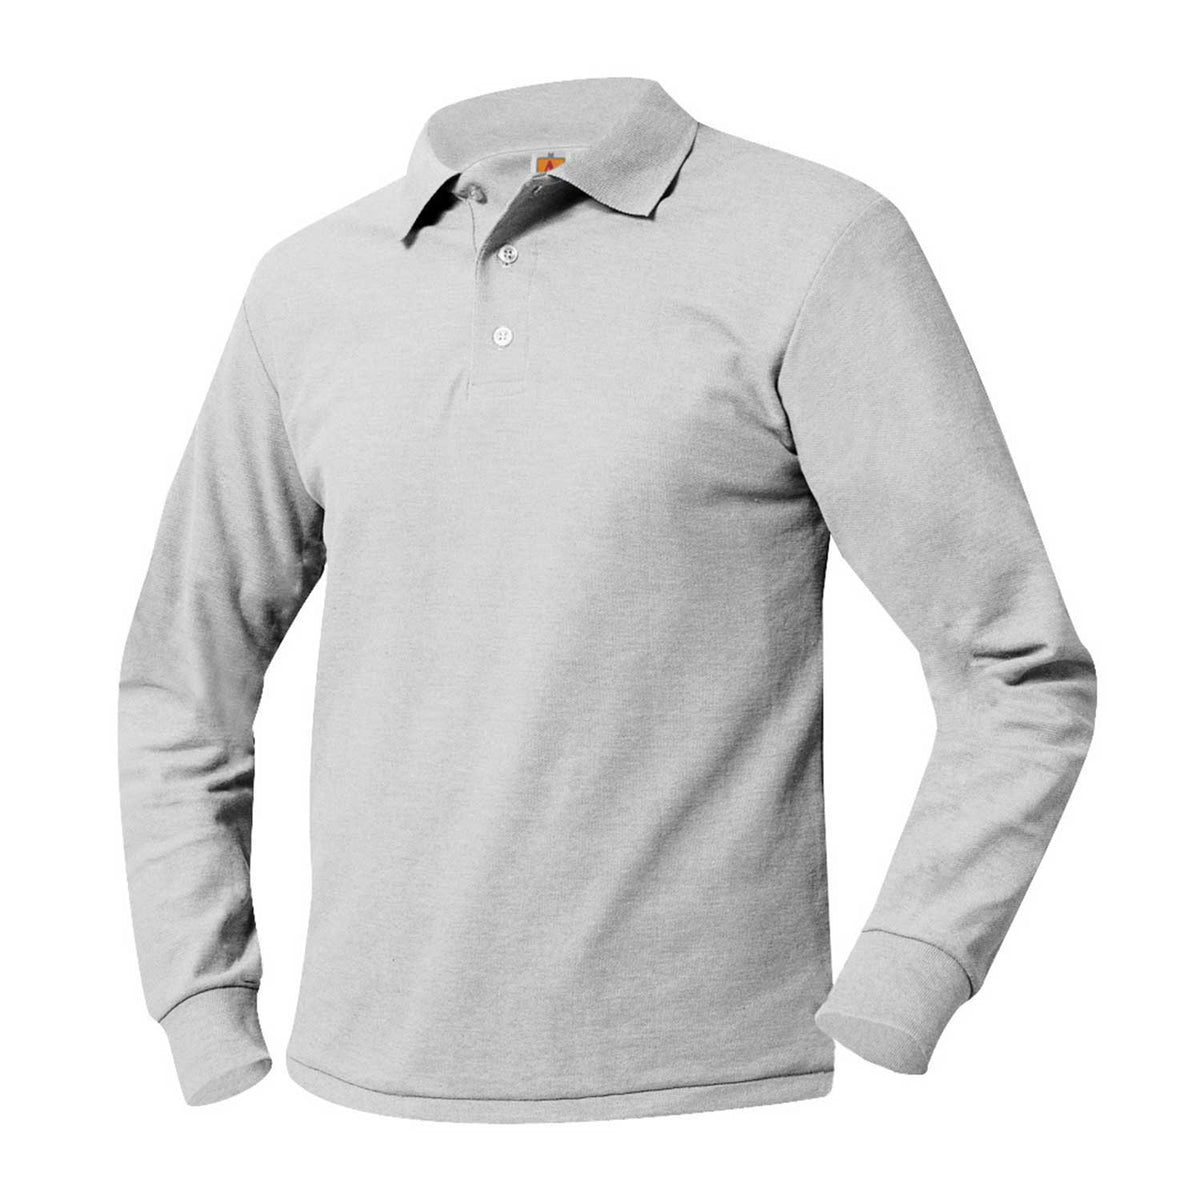 BROOKLYN RISE LONG SLEEVE PIQUE POLO – Student Styles